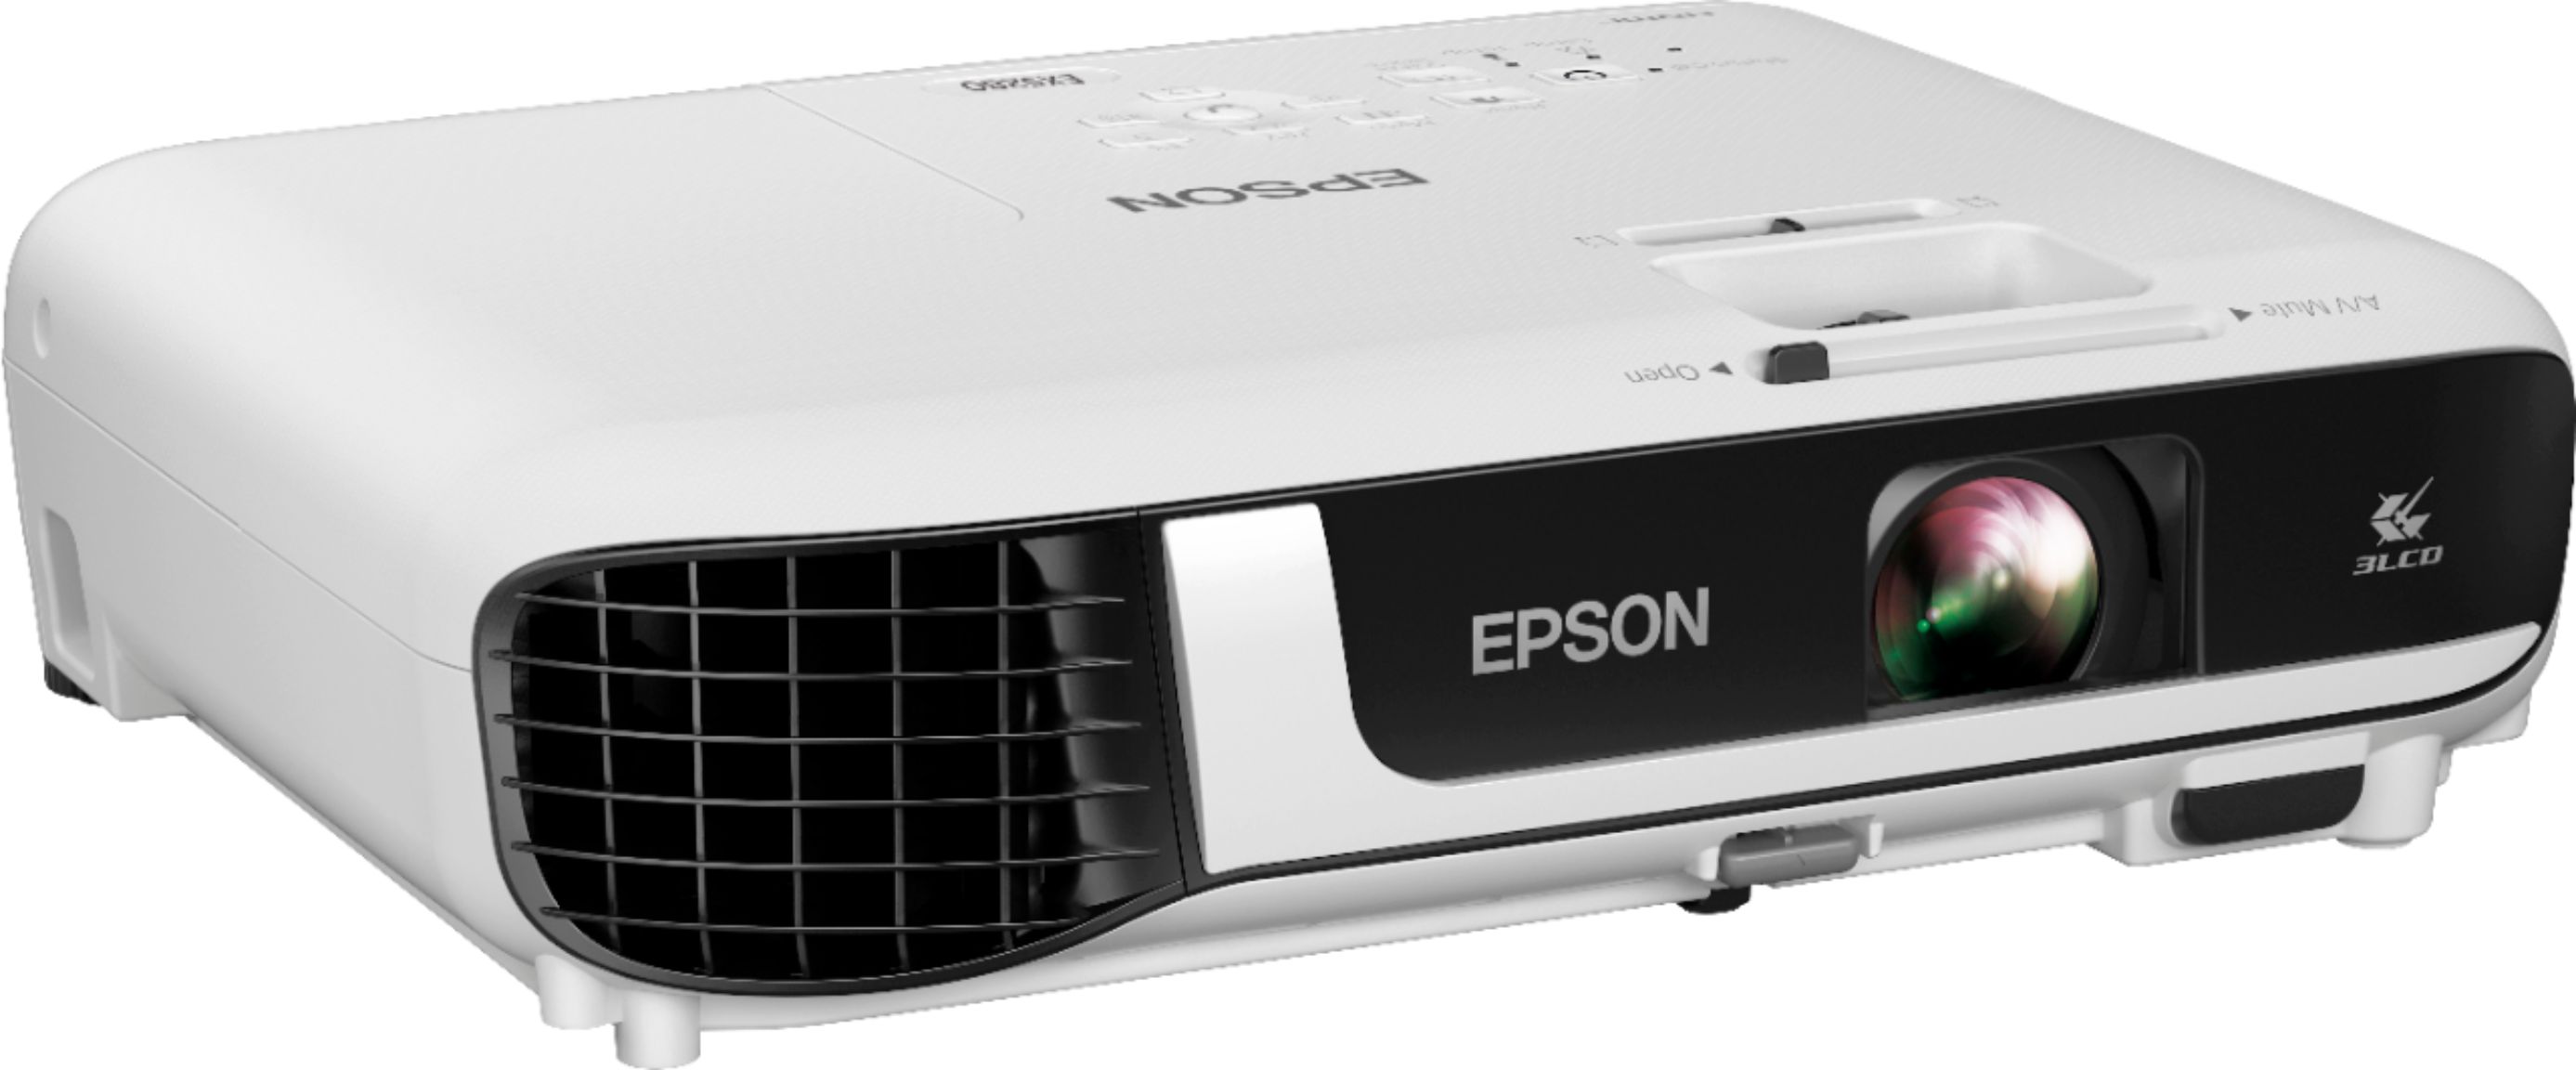 Angle View: Epson EX5280 3LCD XGA Projector with Built-in Speaker - White